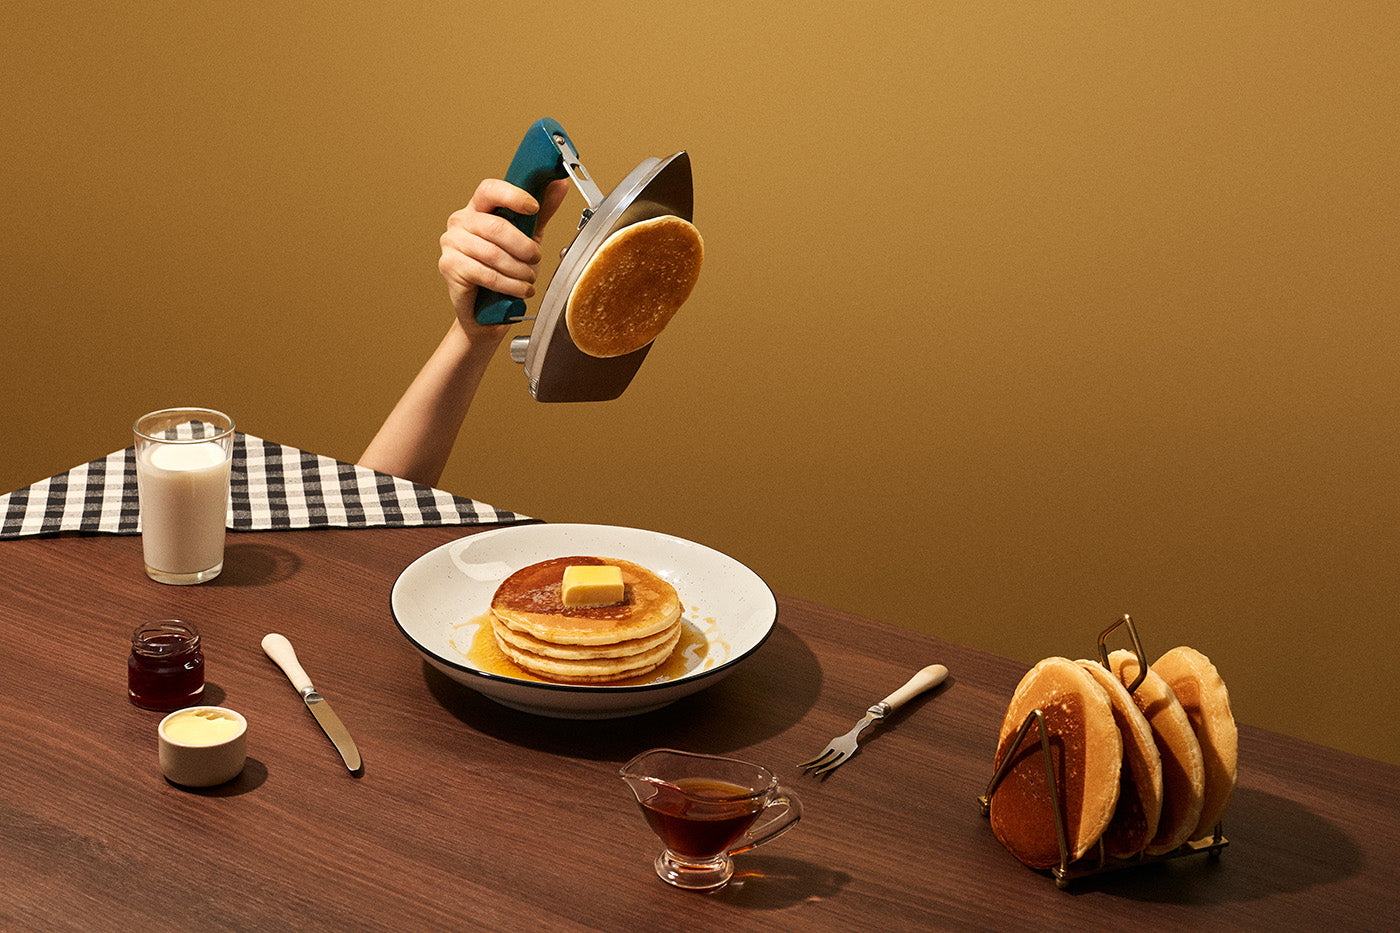 Ironed pancakes. From the series Break/Fast by Fragmento Universo